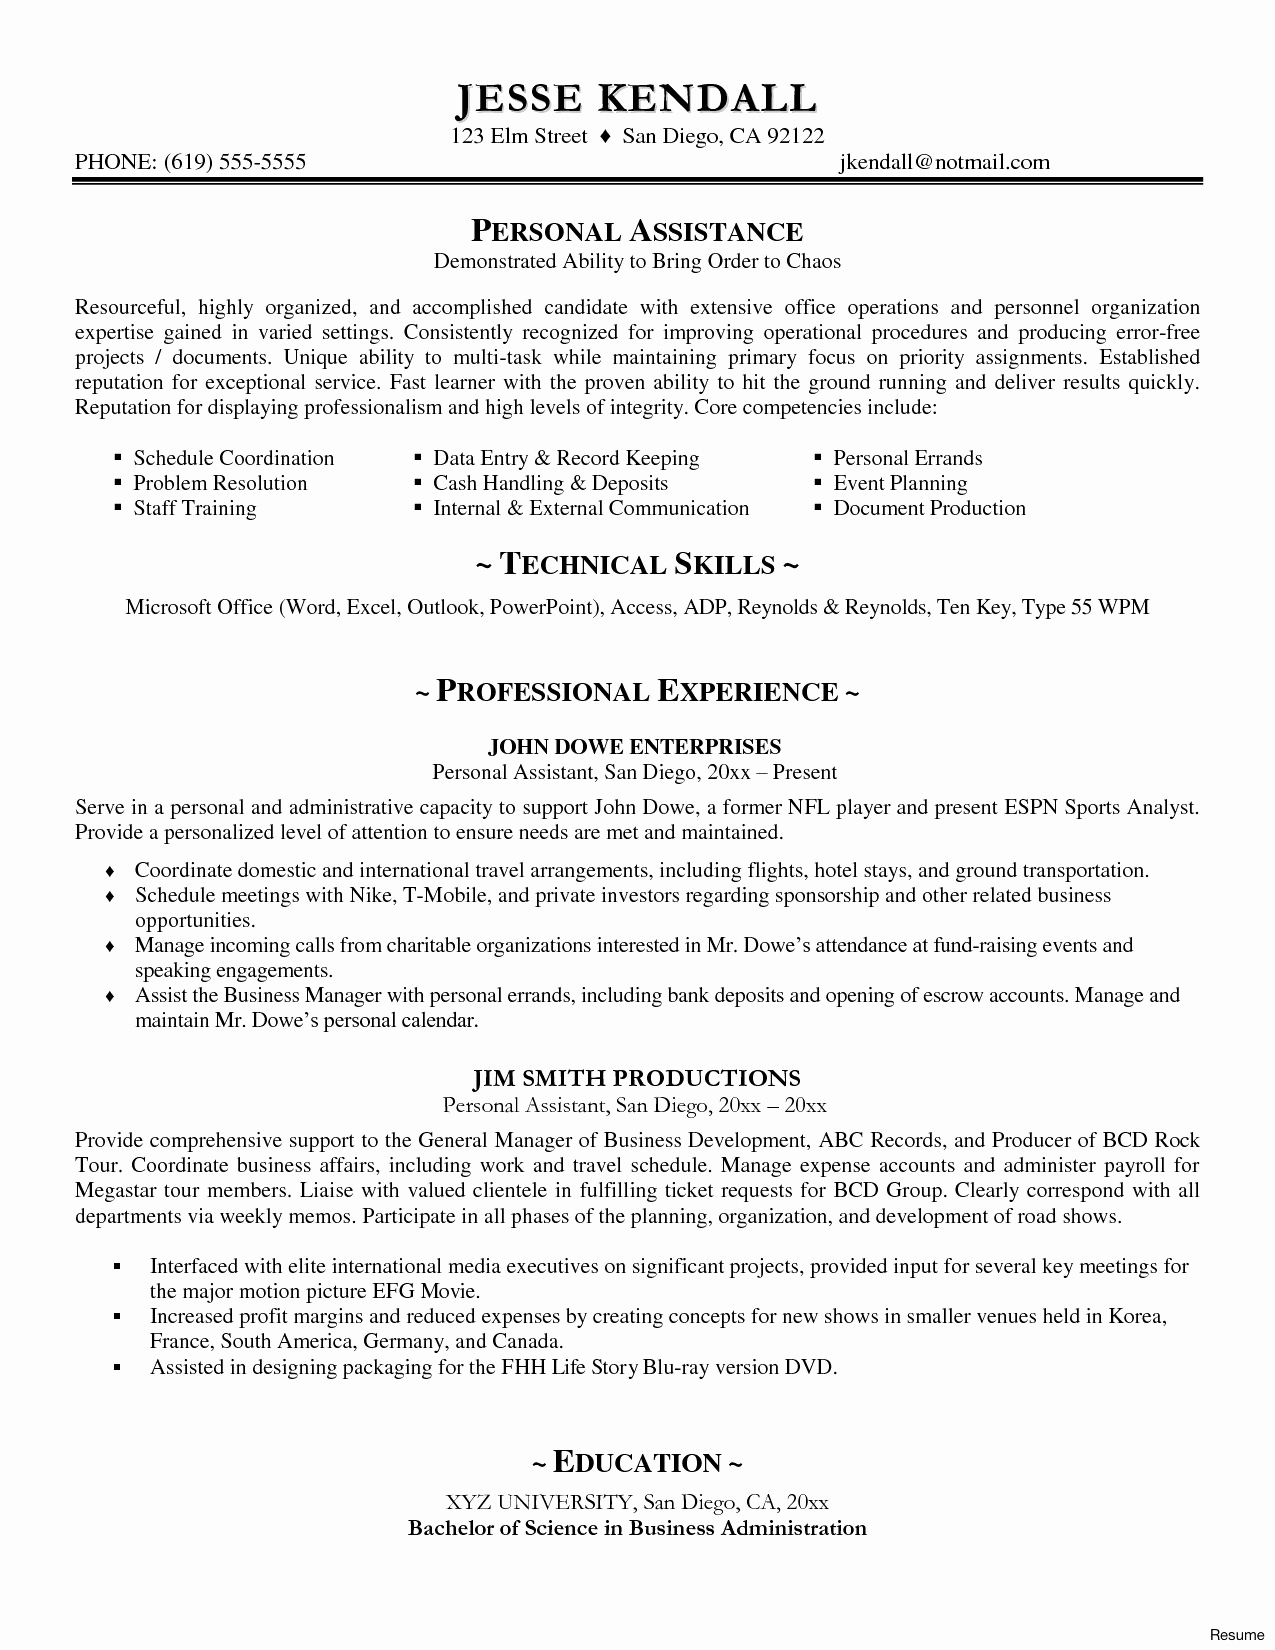 Sponsorship Letter Template Free - Free Cover Letter Template Download Awesome Free Microsoft Resume